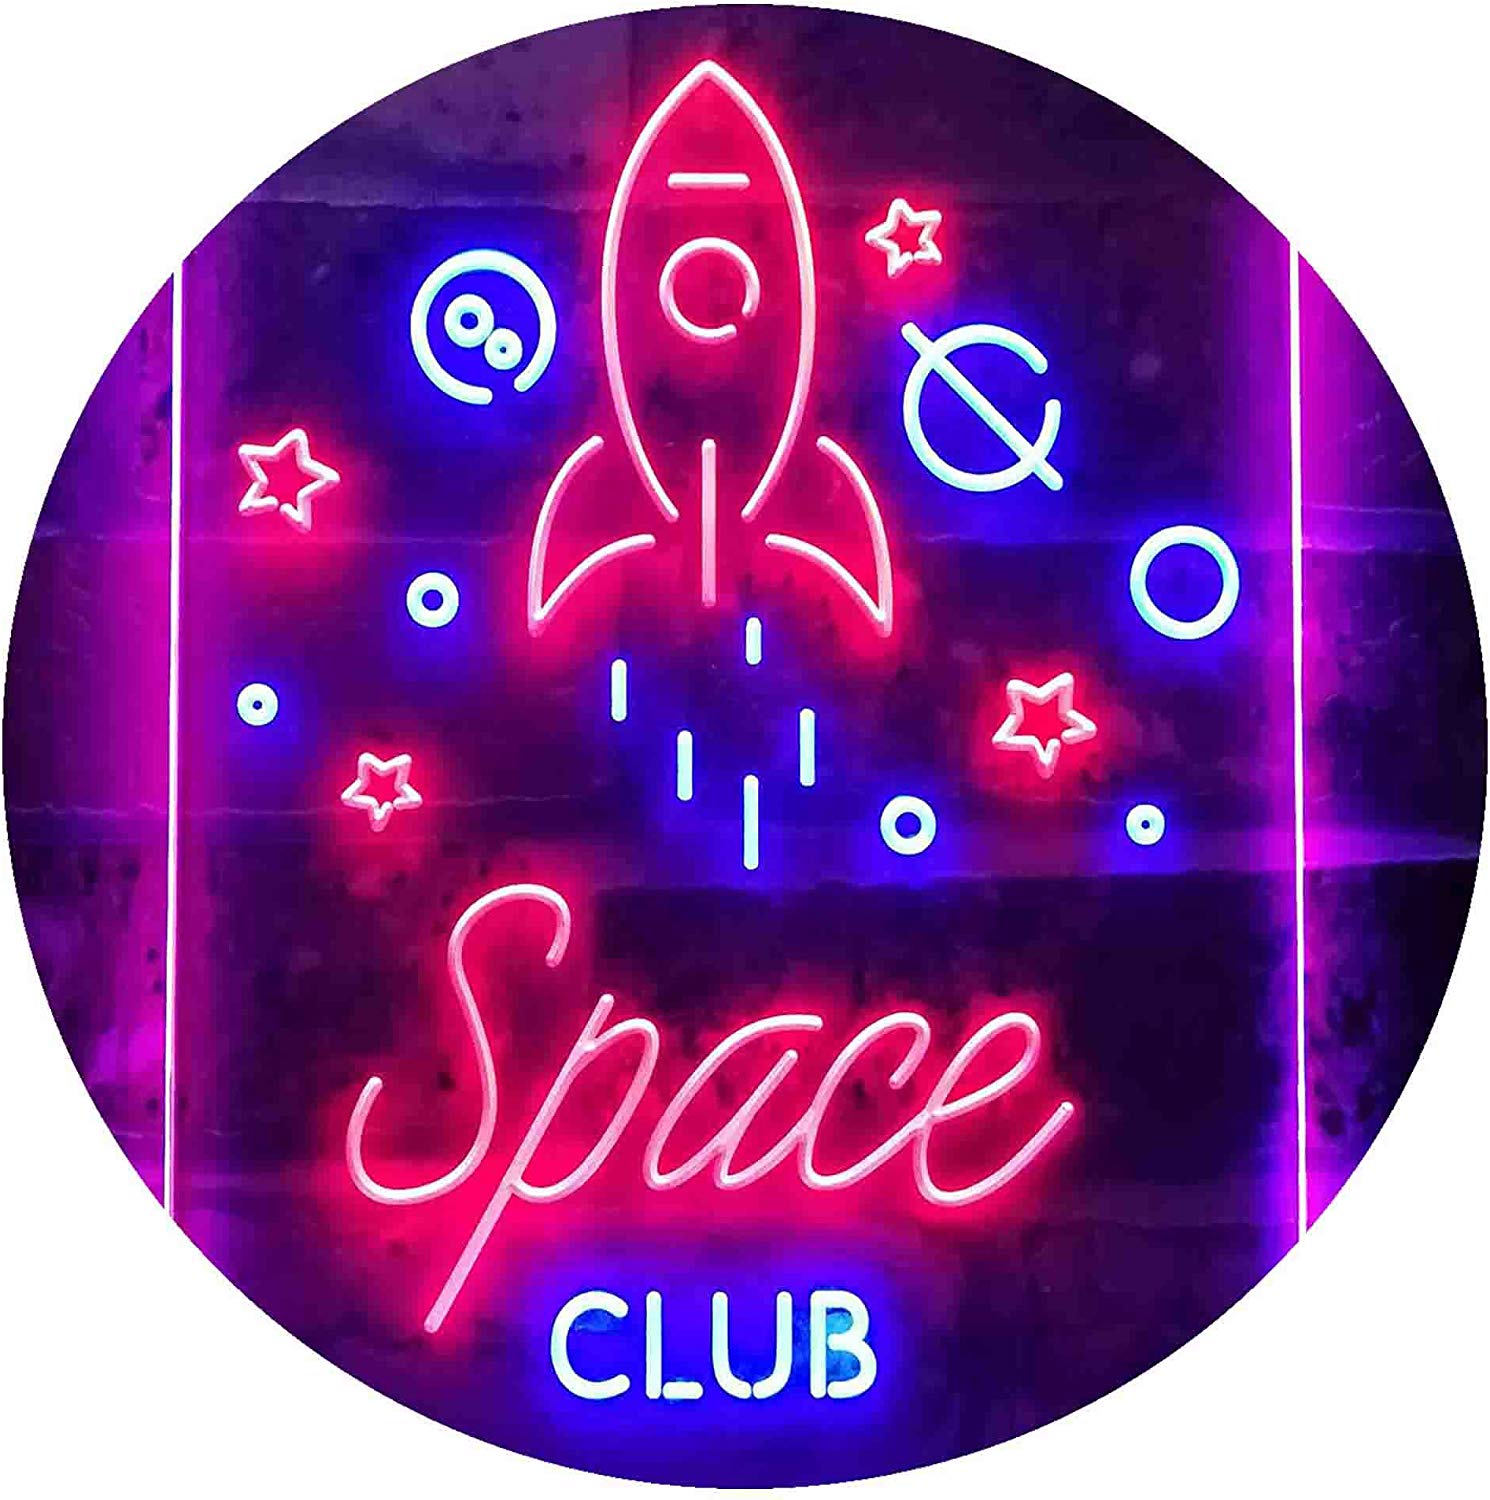  Cool Kids Club Neon Sign, All Are Welcome Neon Light